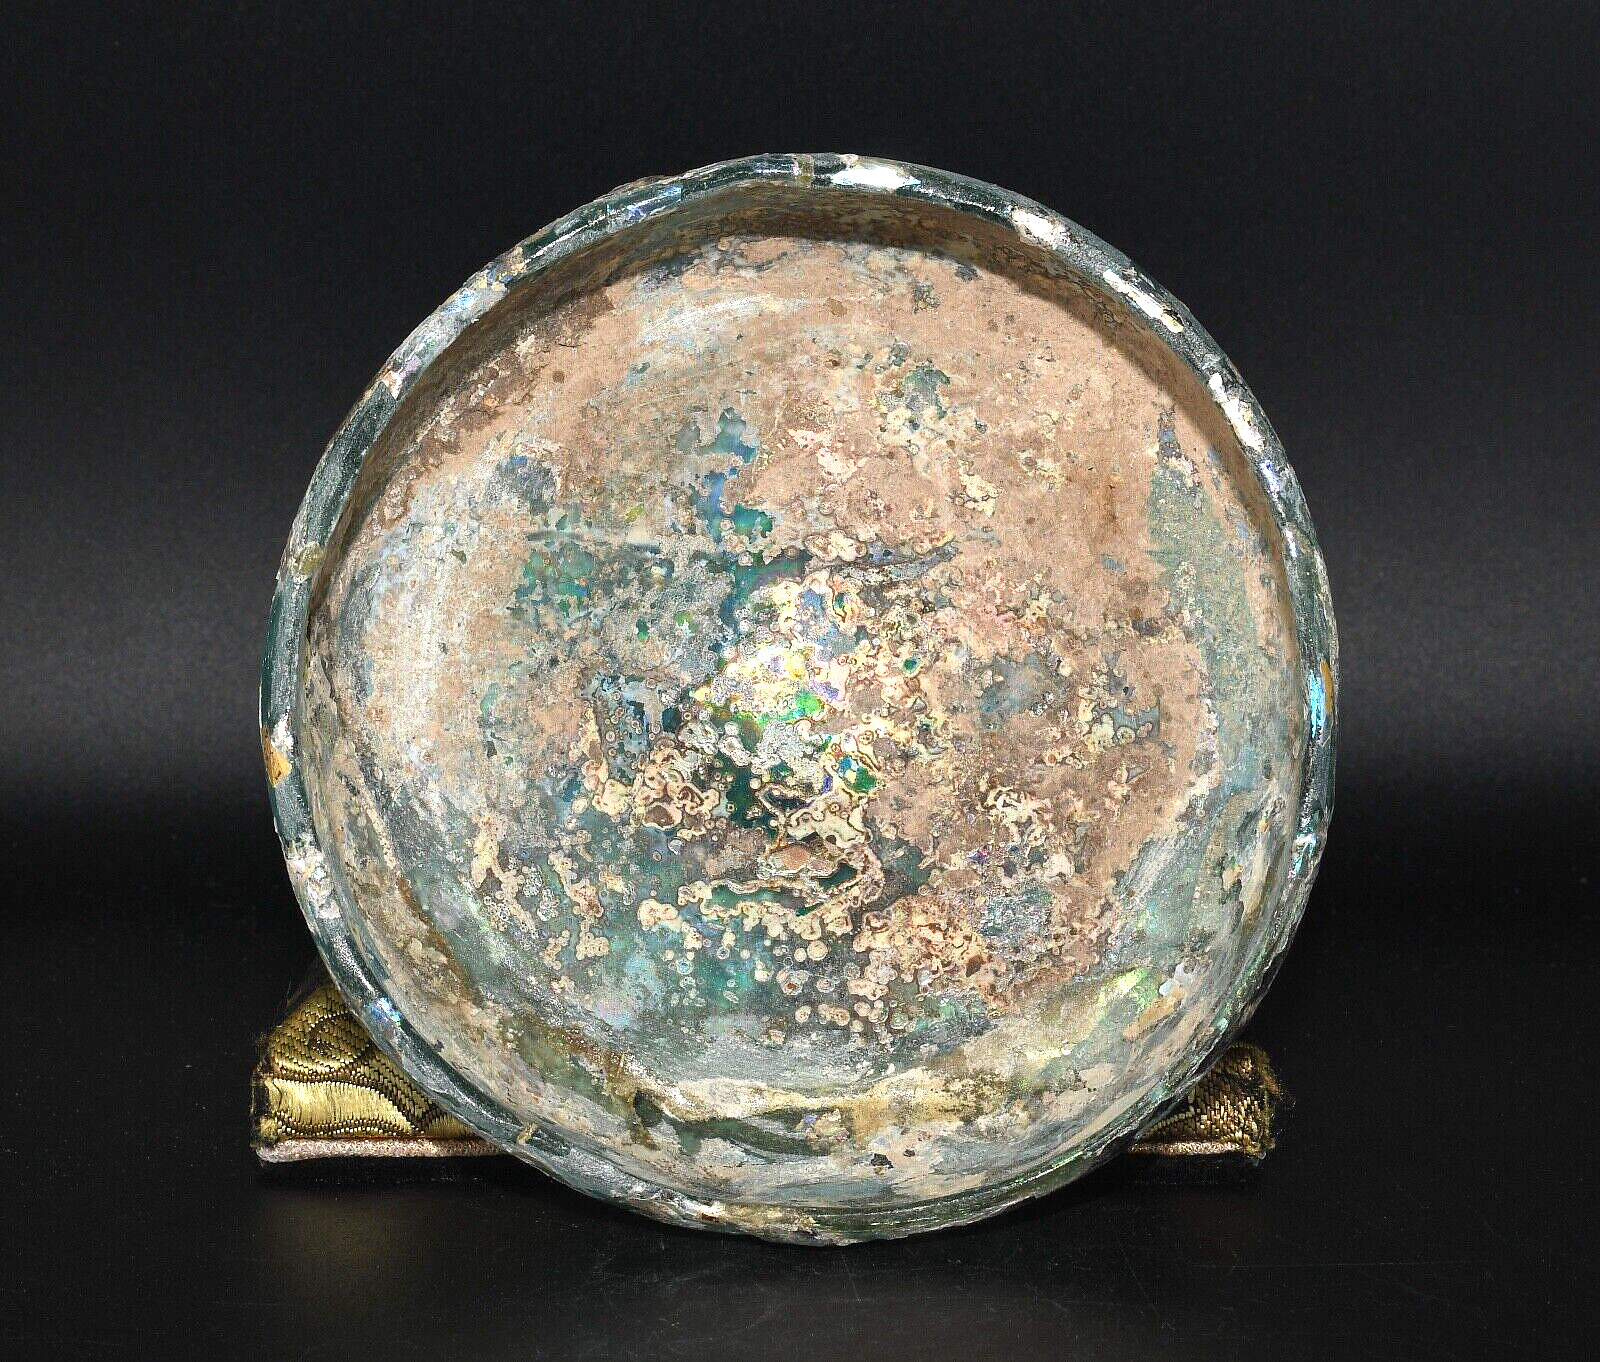 Large Ancient Roman Glass Bowl with Iridescent Patina From Middle East